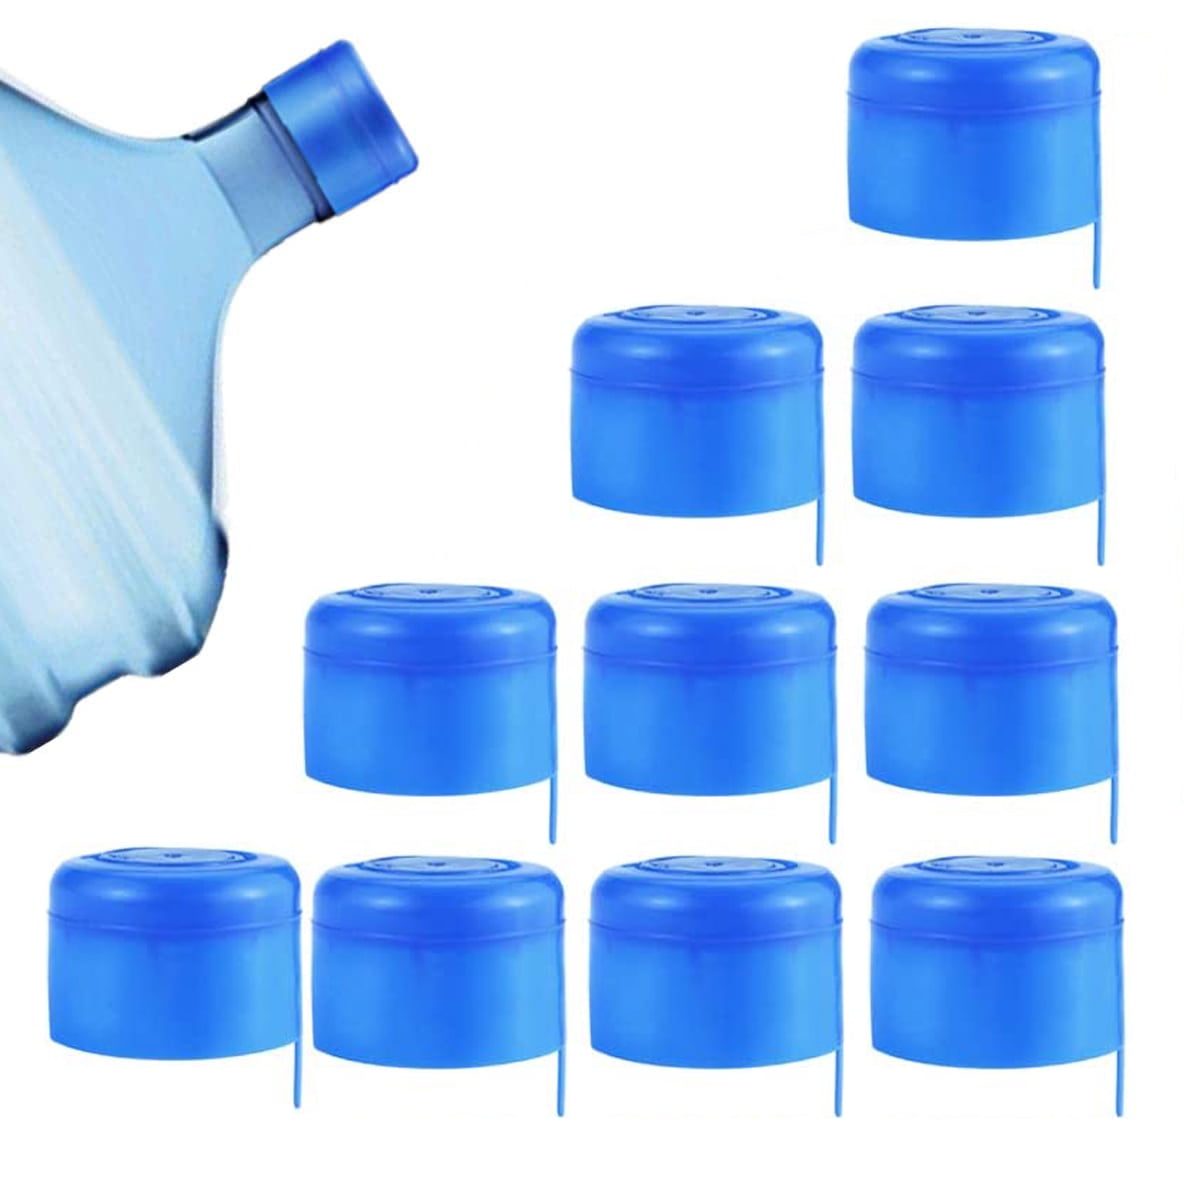 LOT OF 5 Water Bottle Screw On Cap 3 & 5 Gallon 55 mm Replacement Tops Lid Cover 